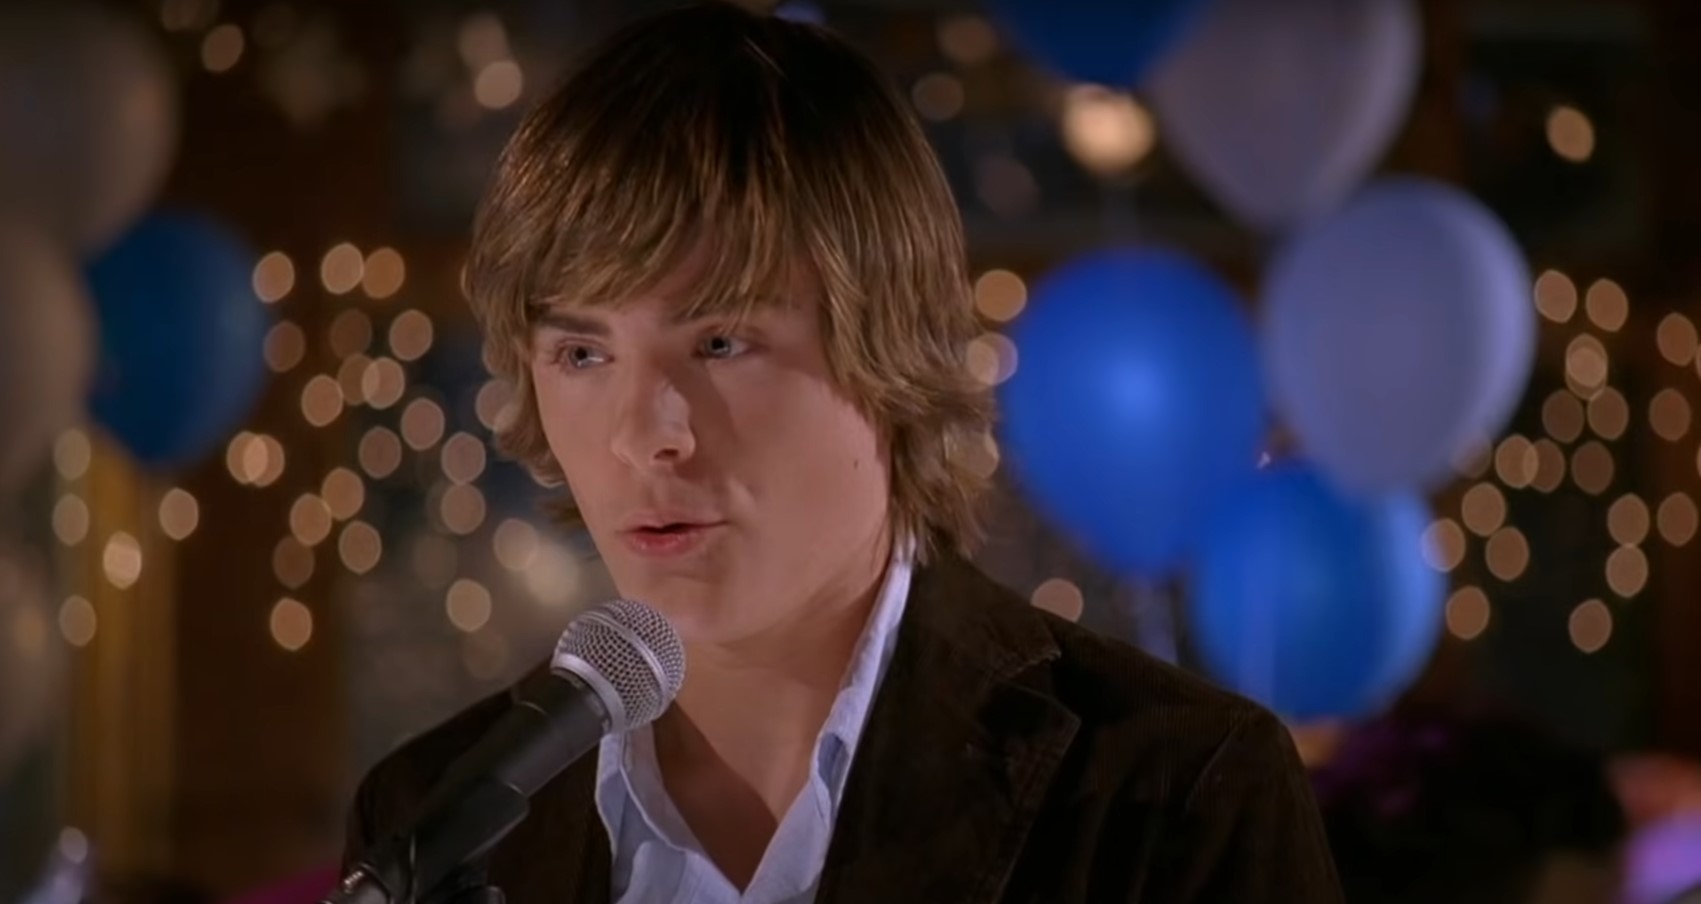 Is High School Musical Based on a True Story?